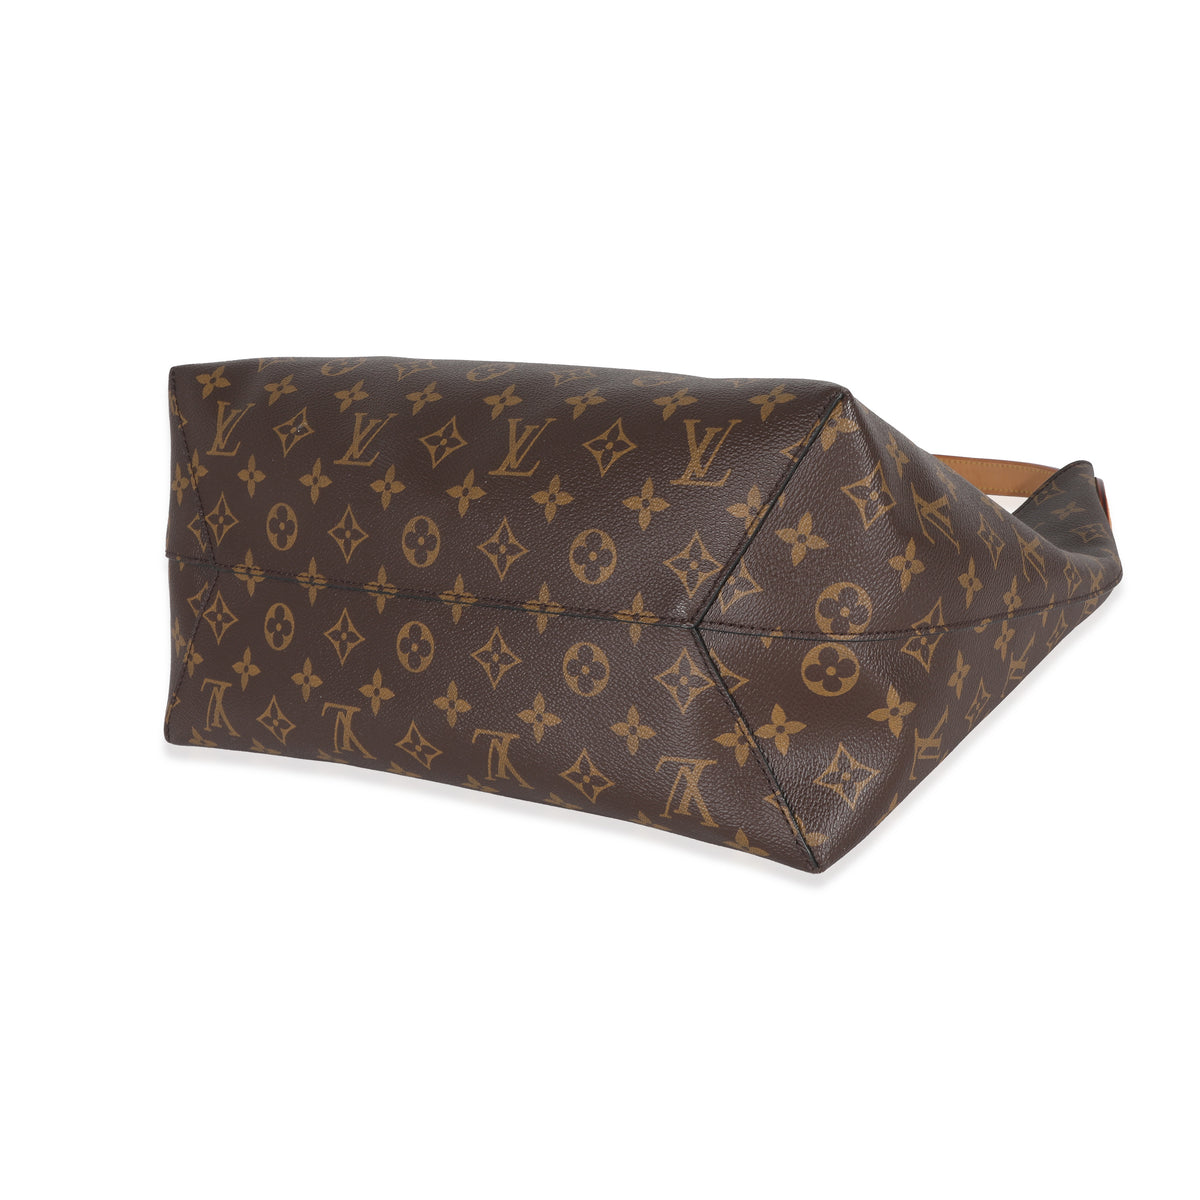 A Guide to Authenticating the Louis Vuitton Flower Hobo (How to